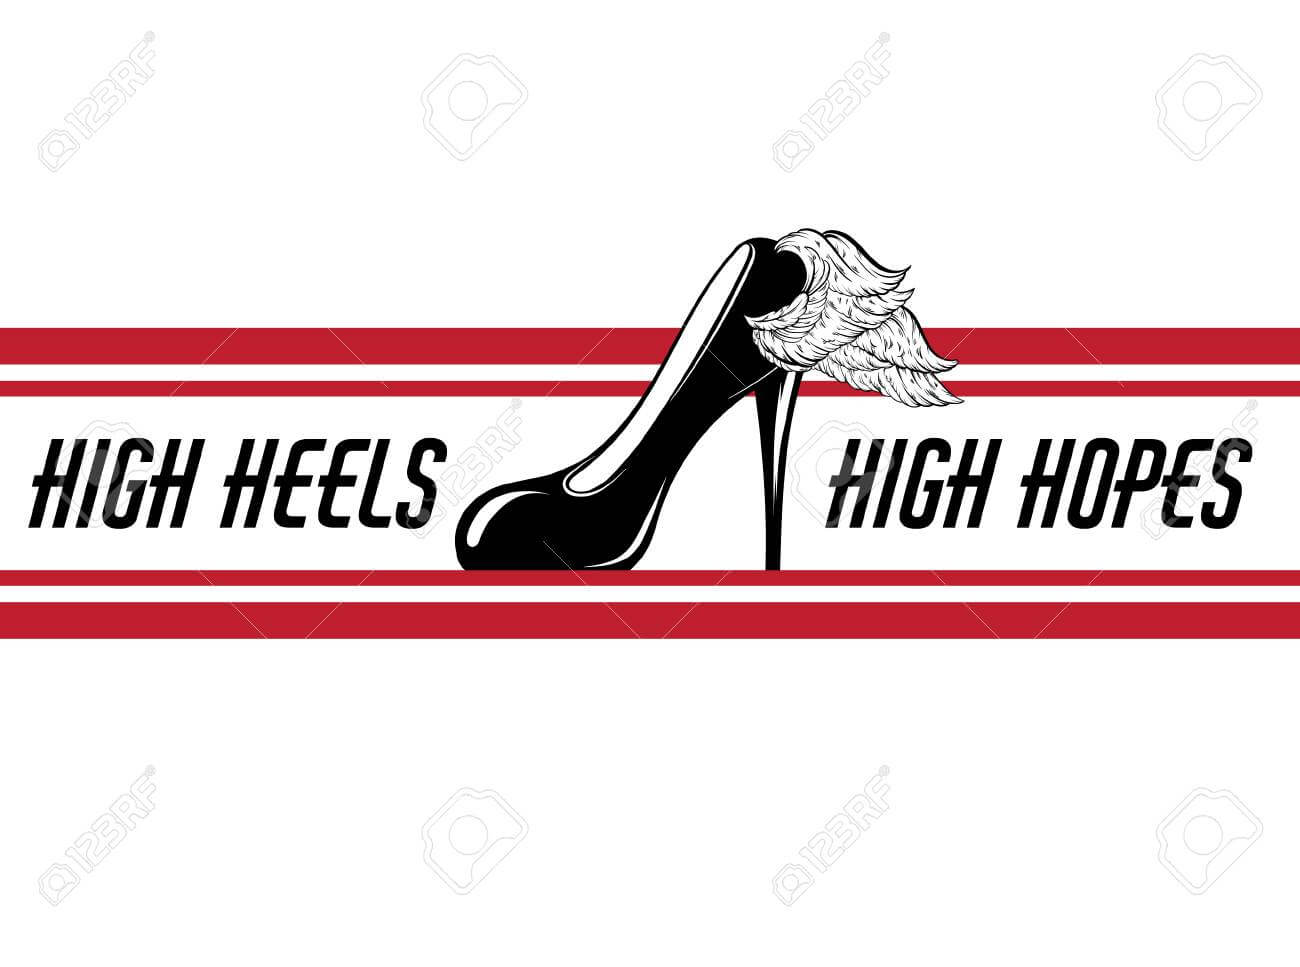 High Heels, High Hopes. Vector Hand Drawn Illustration Of Shoe.. Pertaining To High Heel Template For Cards